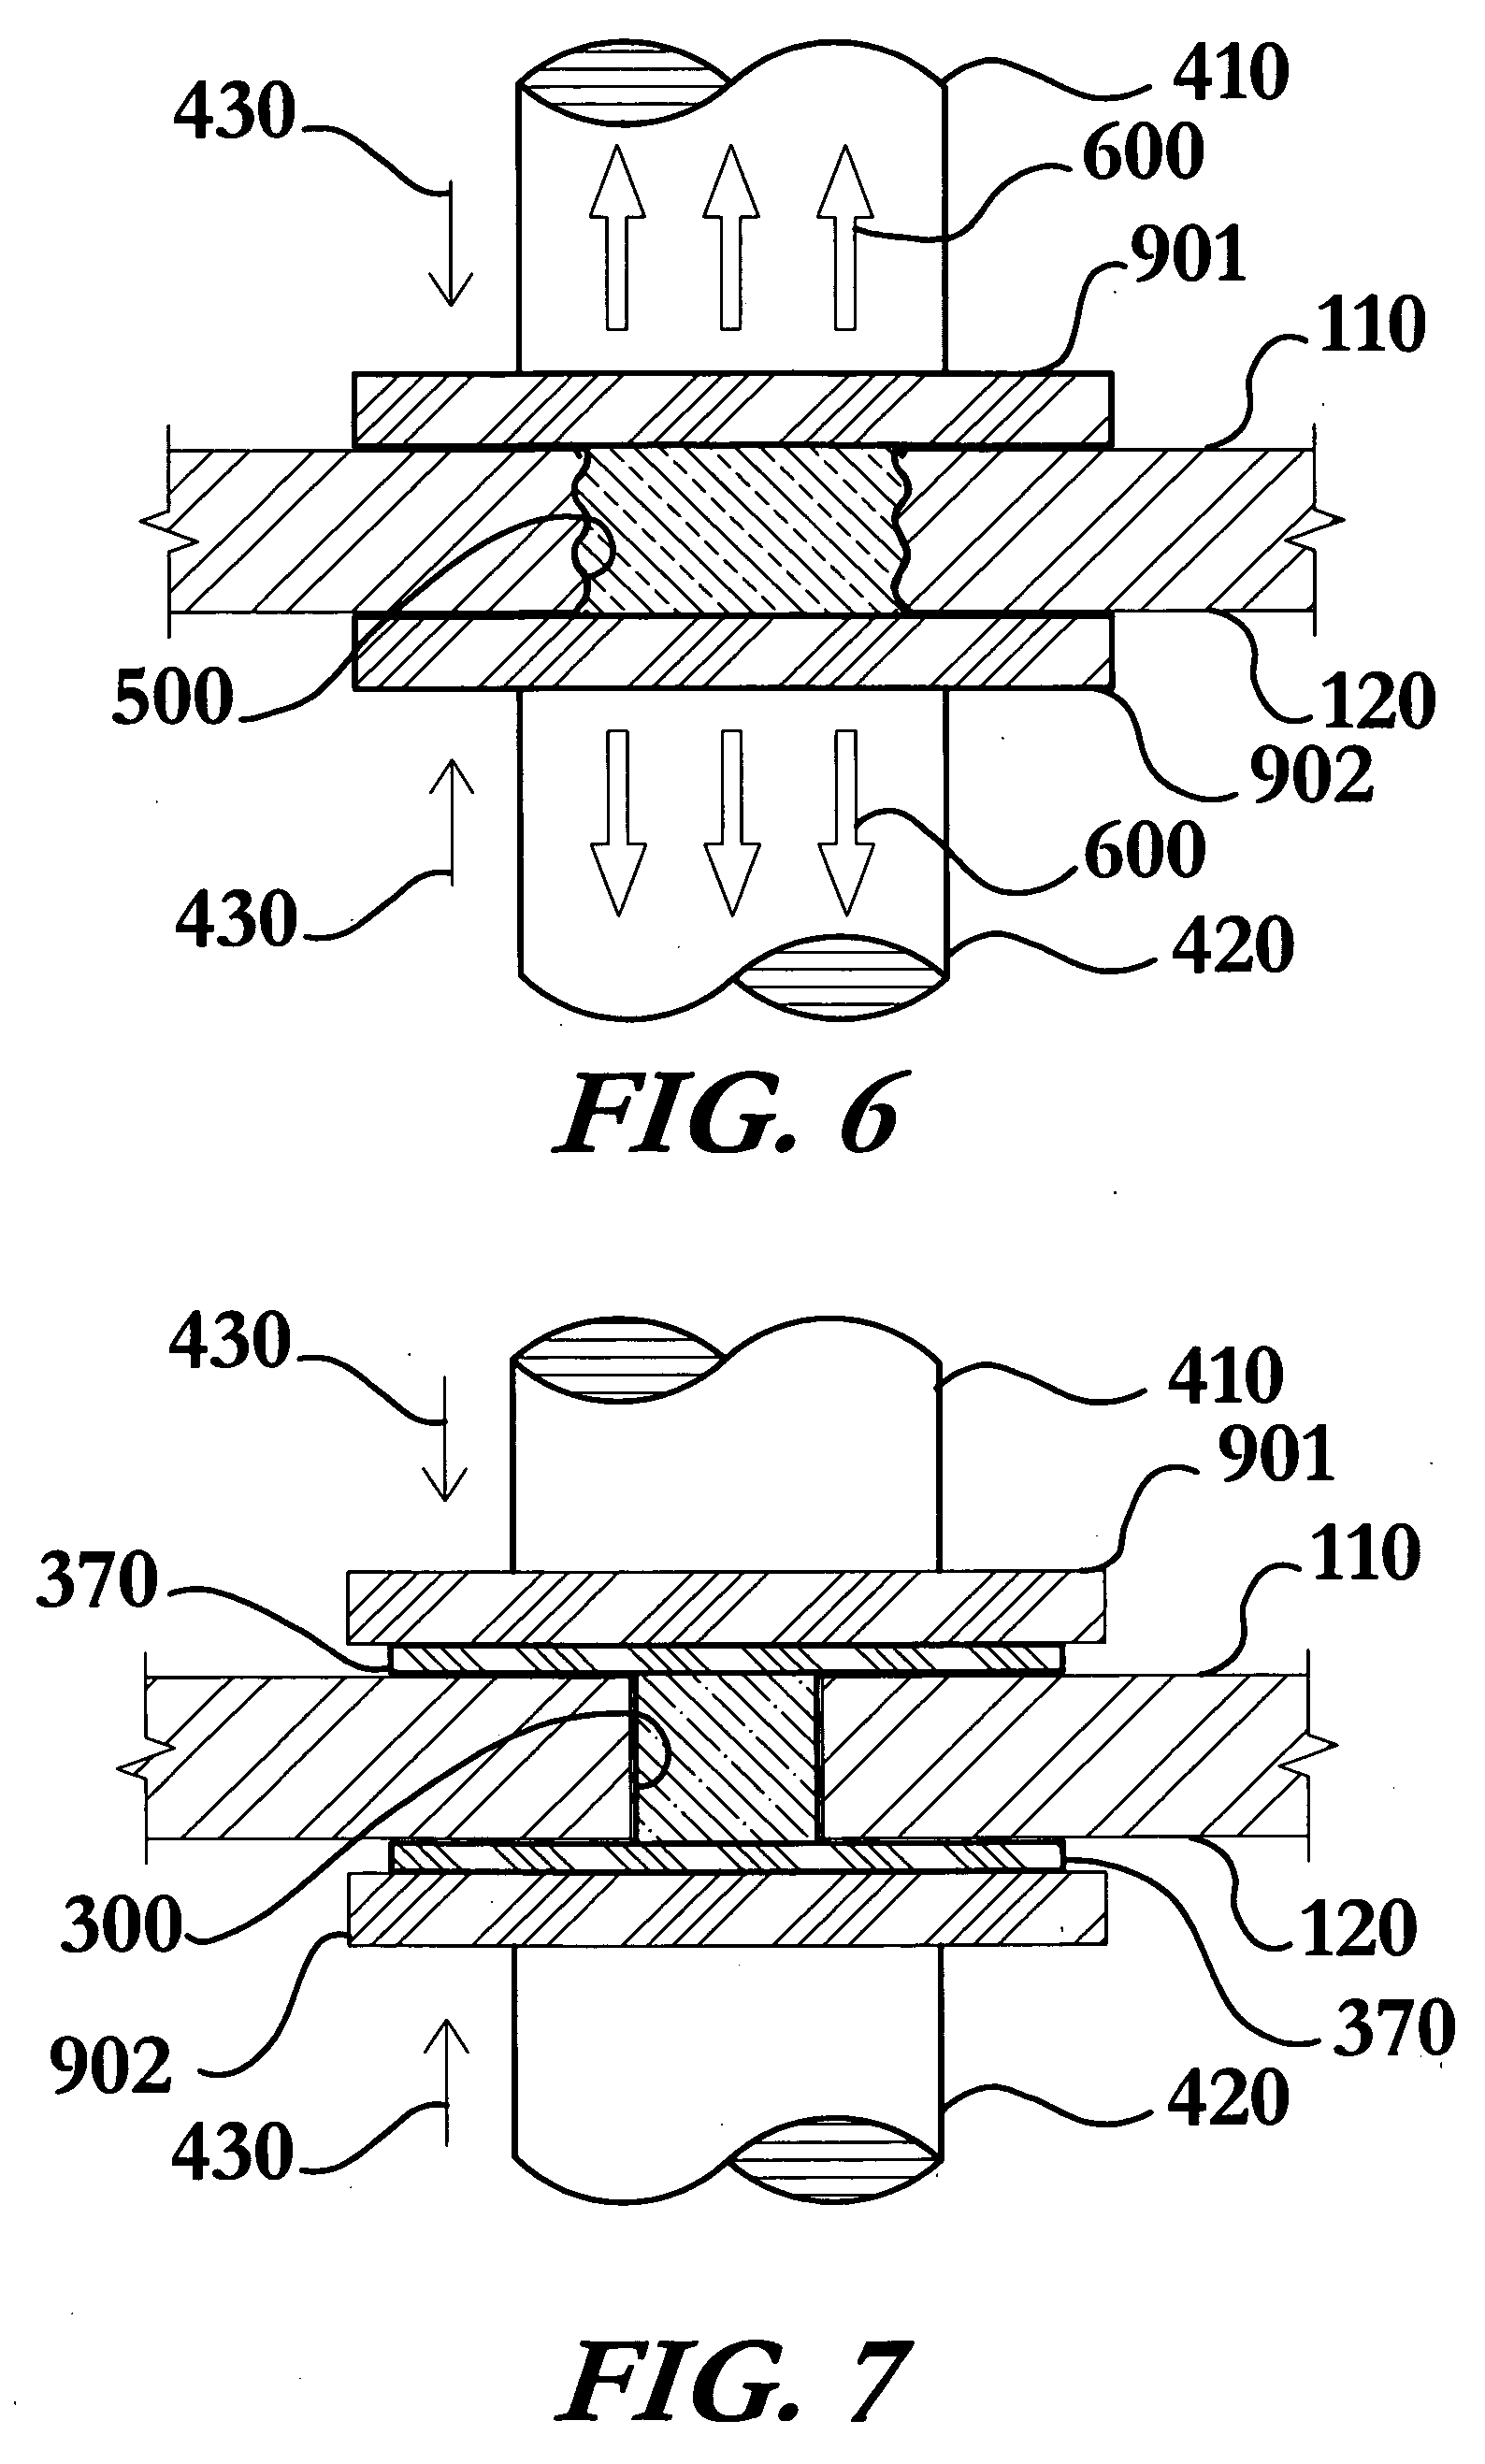 Method for repairing defects in a conductive substrate using welding